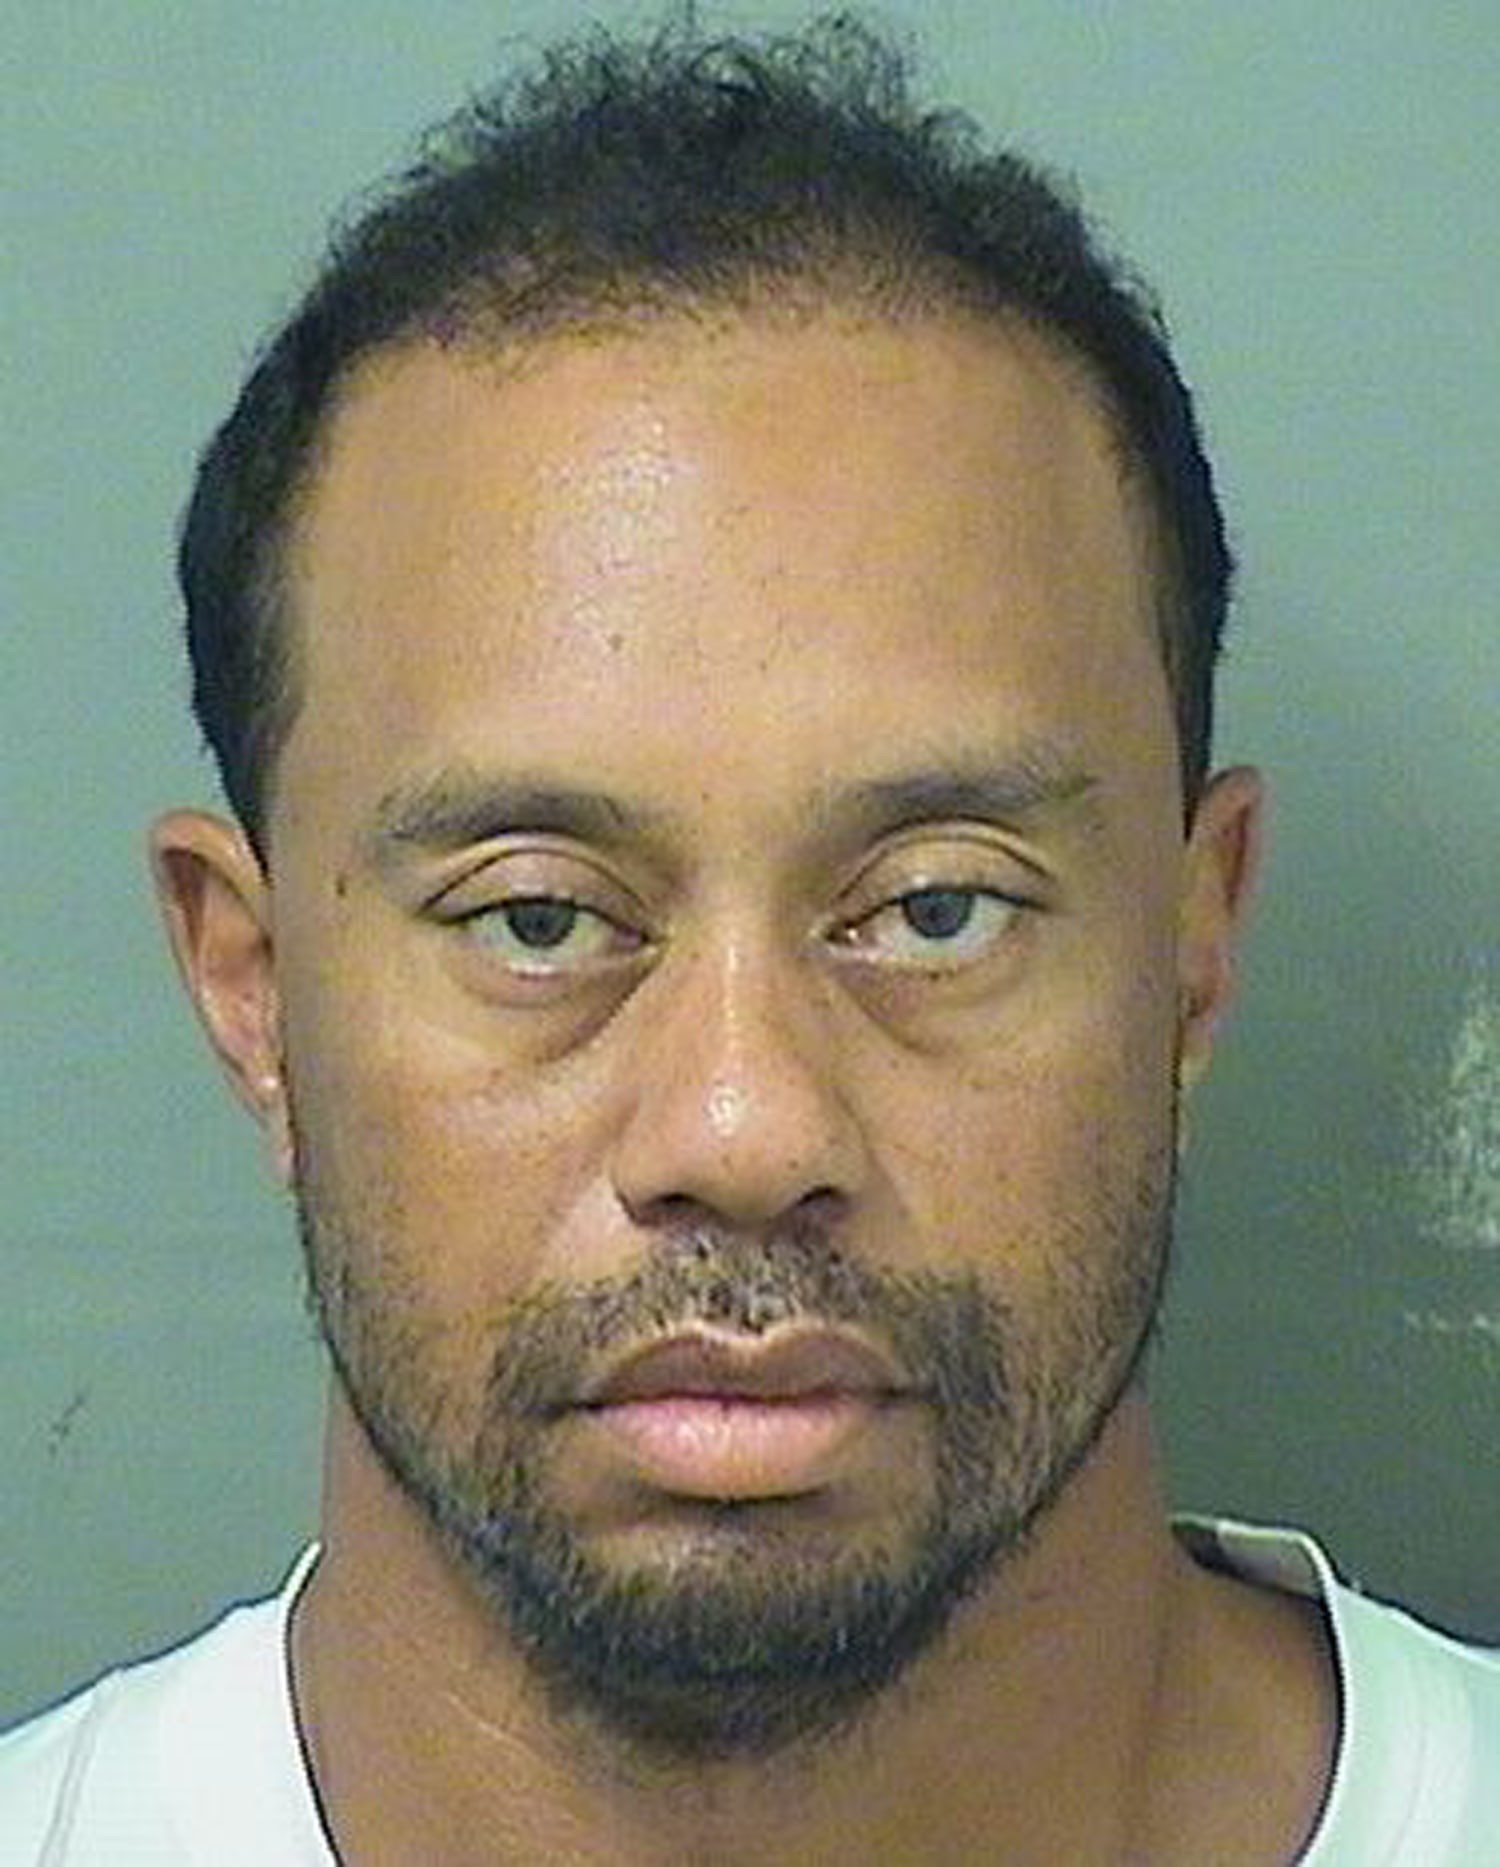 Tiger Woods Arrested for DUI in Florida pic